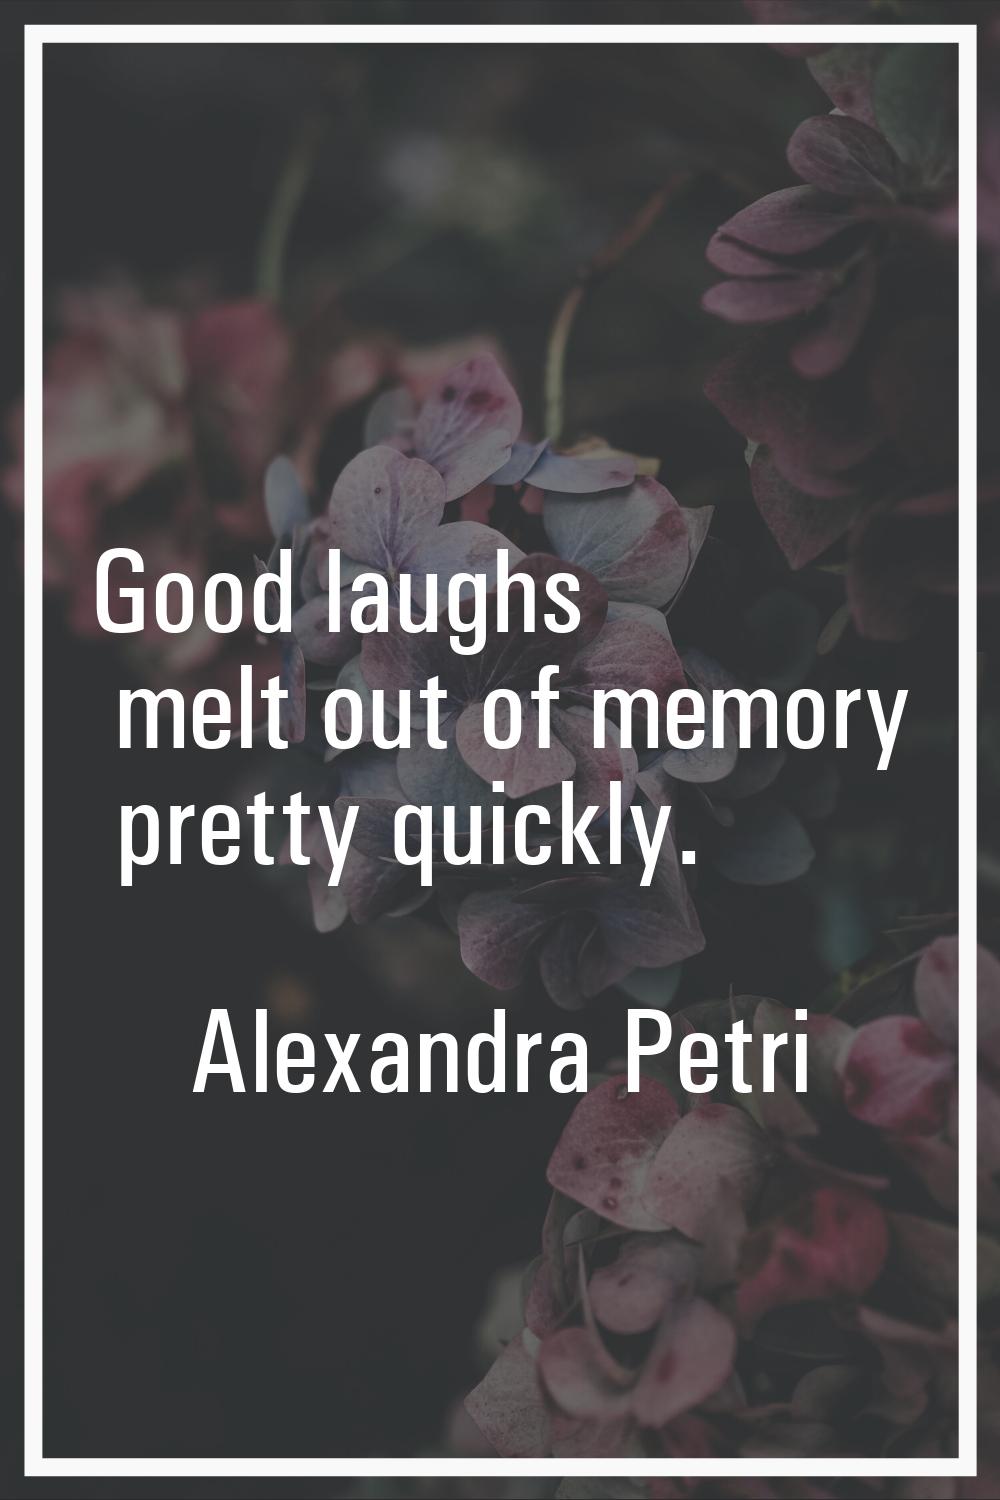 Good laughs melt out of memory pretty quickly.